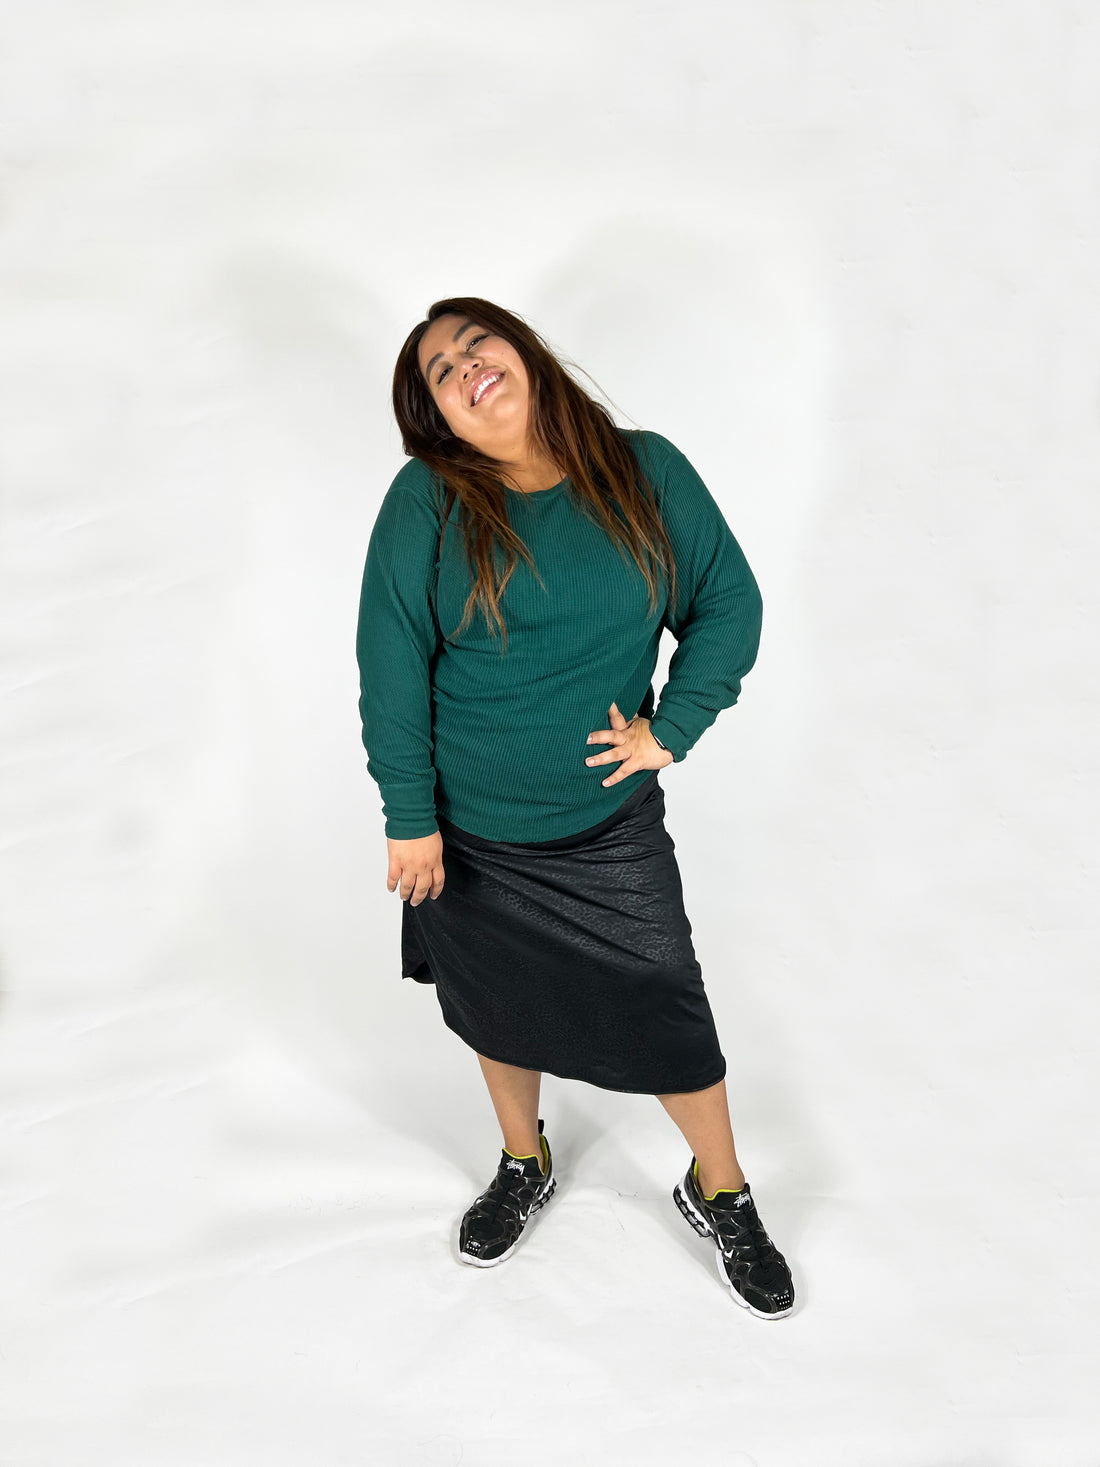 Modesty Knows No Size: Embracing Fashion with Modest Plus-Size Clothin –  Transcendent Active